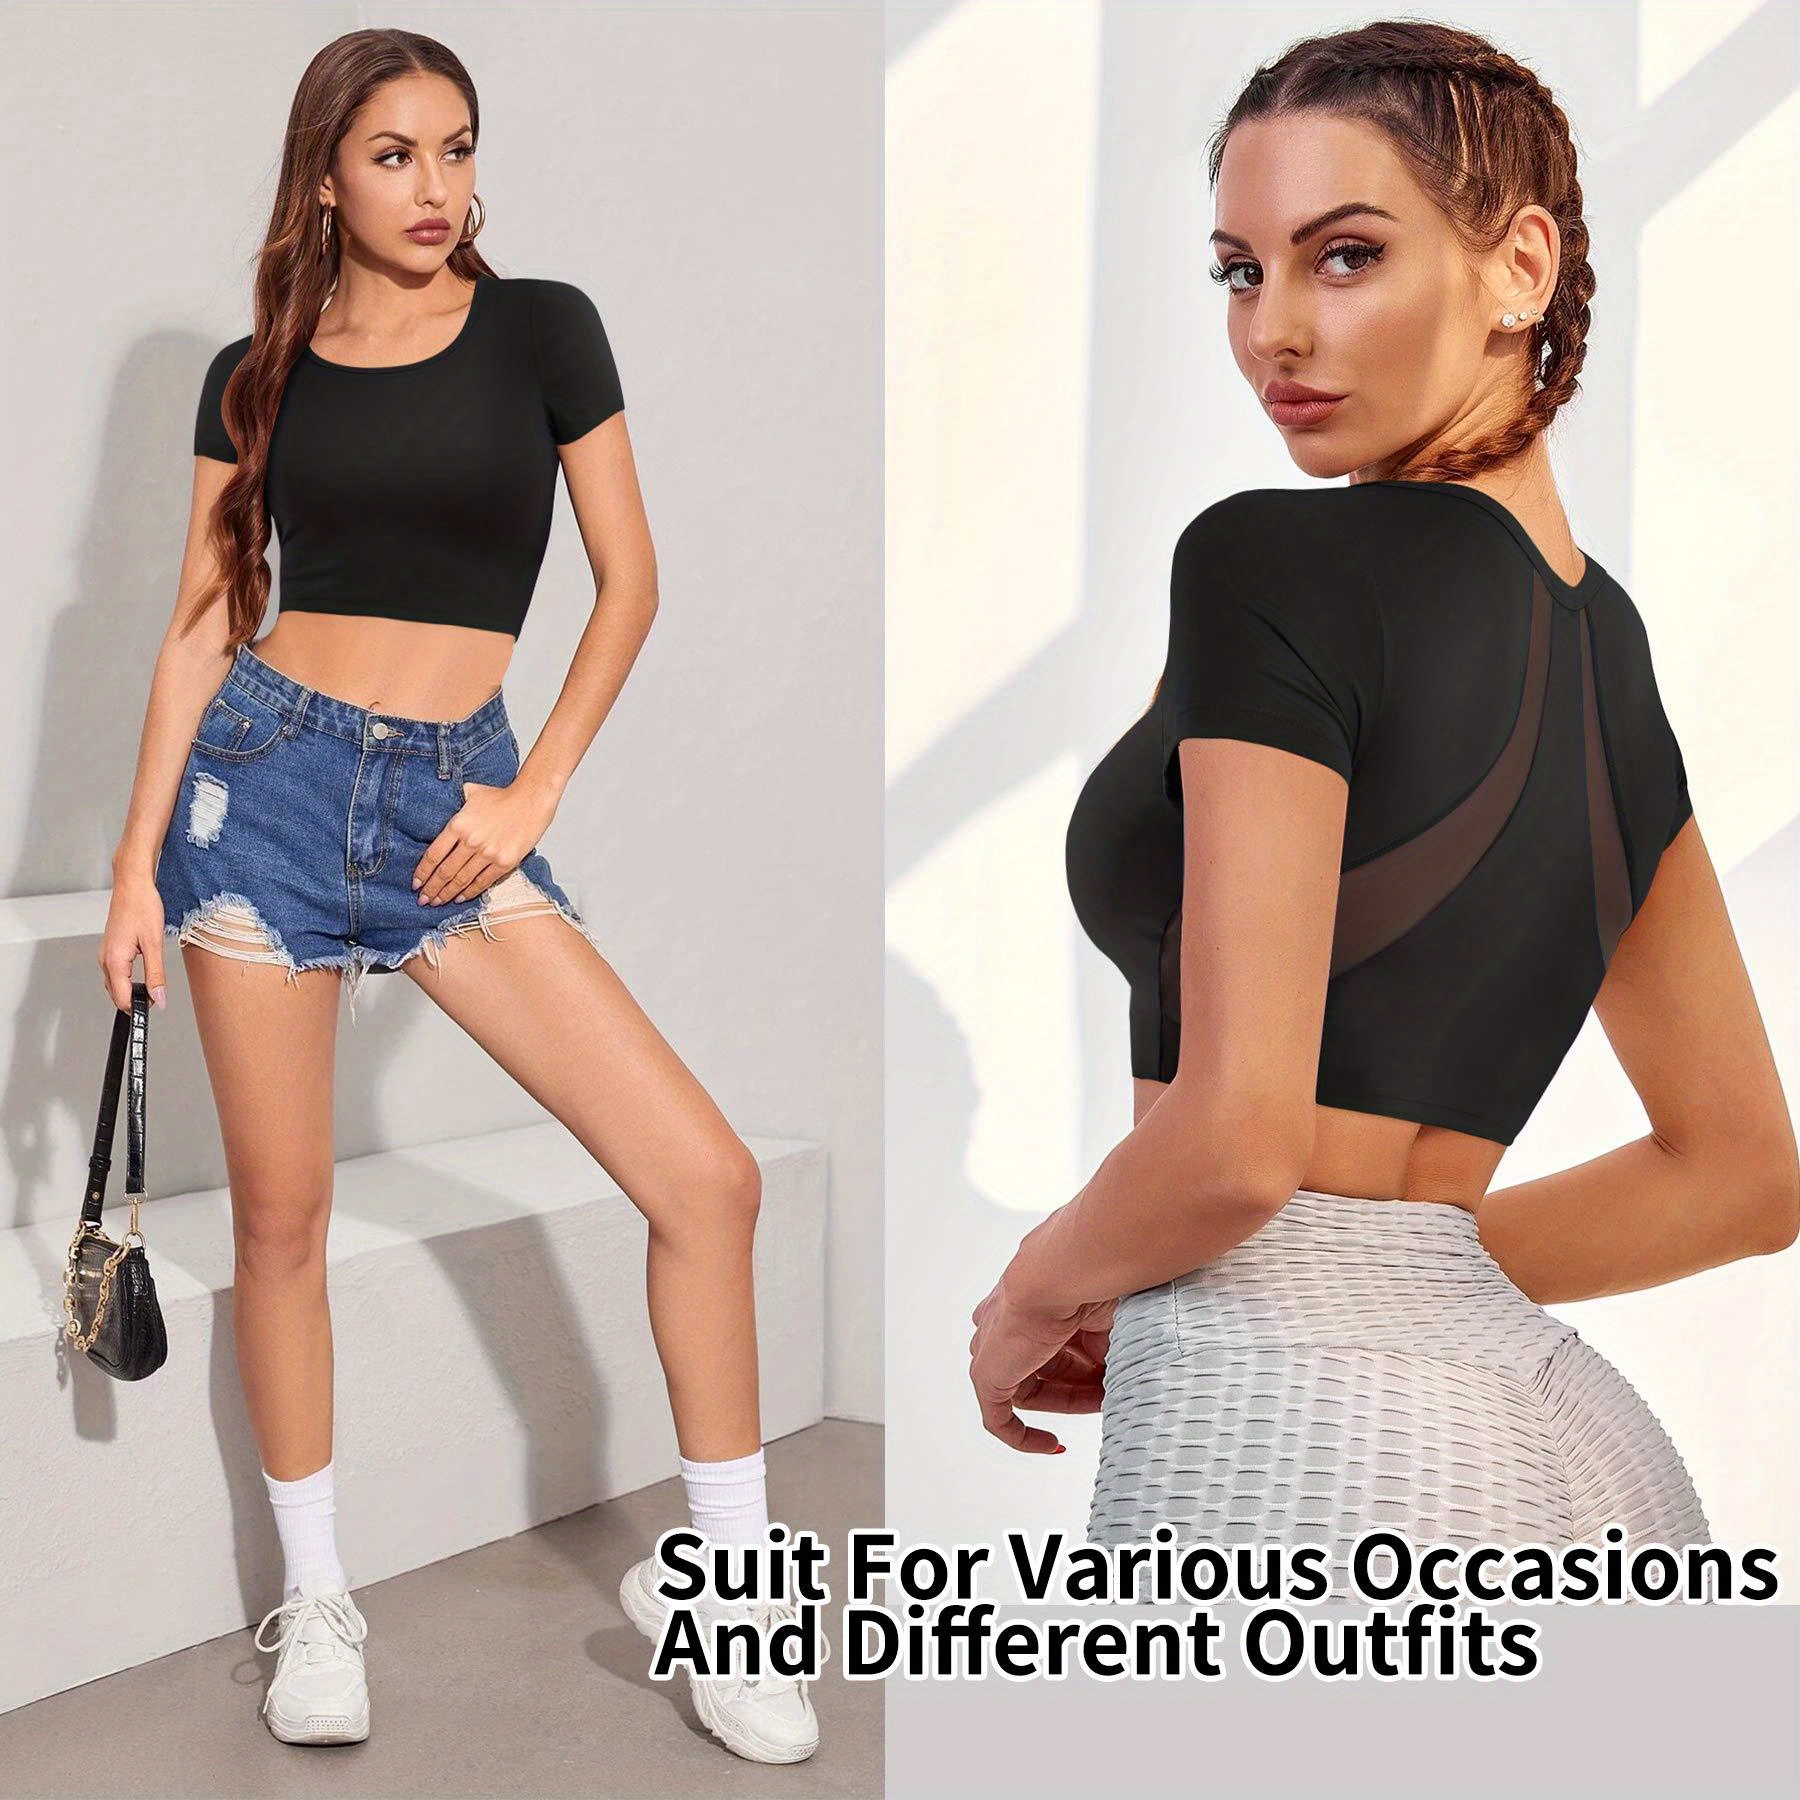 Cropped Workout Tops for Women Mesh Back Womens Workout Tops Flowy